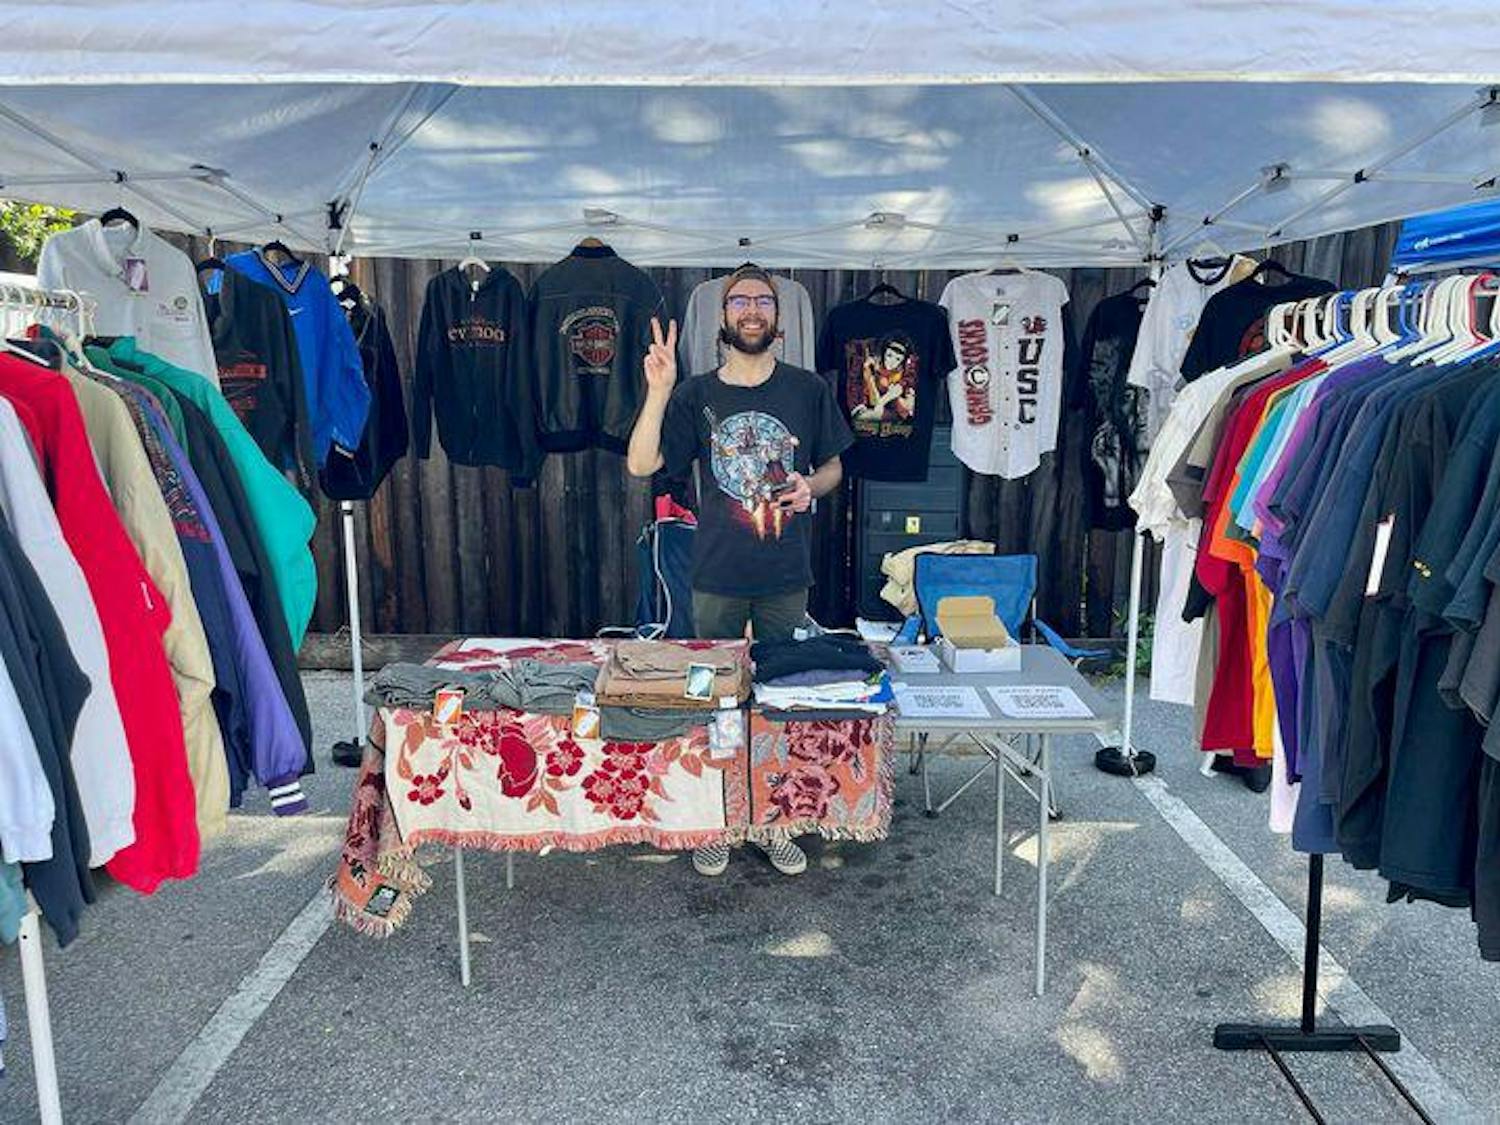 Josh Rogers poses for a picture at Snips Vintage during a pop-up thrift fair in October. The Gamecock Vintage Market aims to unite vendors from all over both North and South Carolina with USC students who are looking to thrift in a sustainable way.